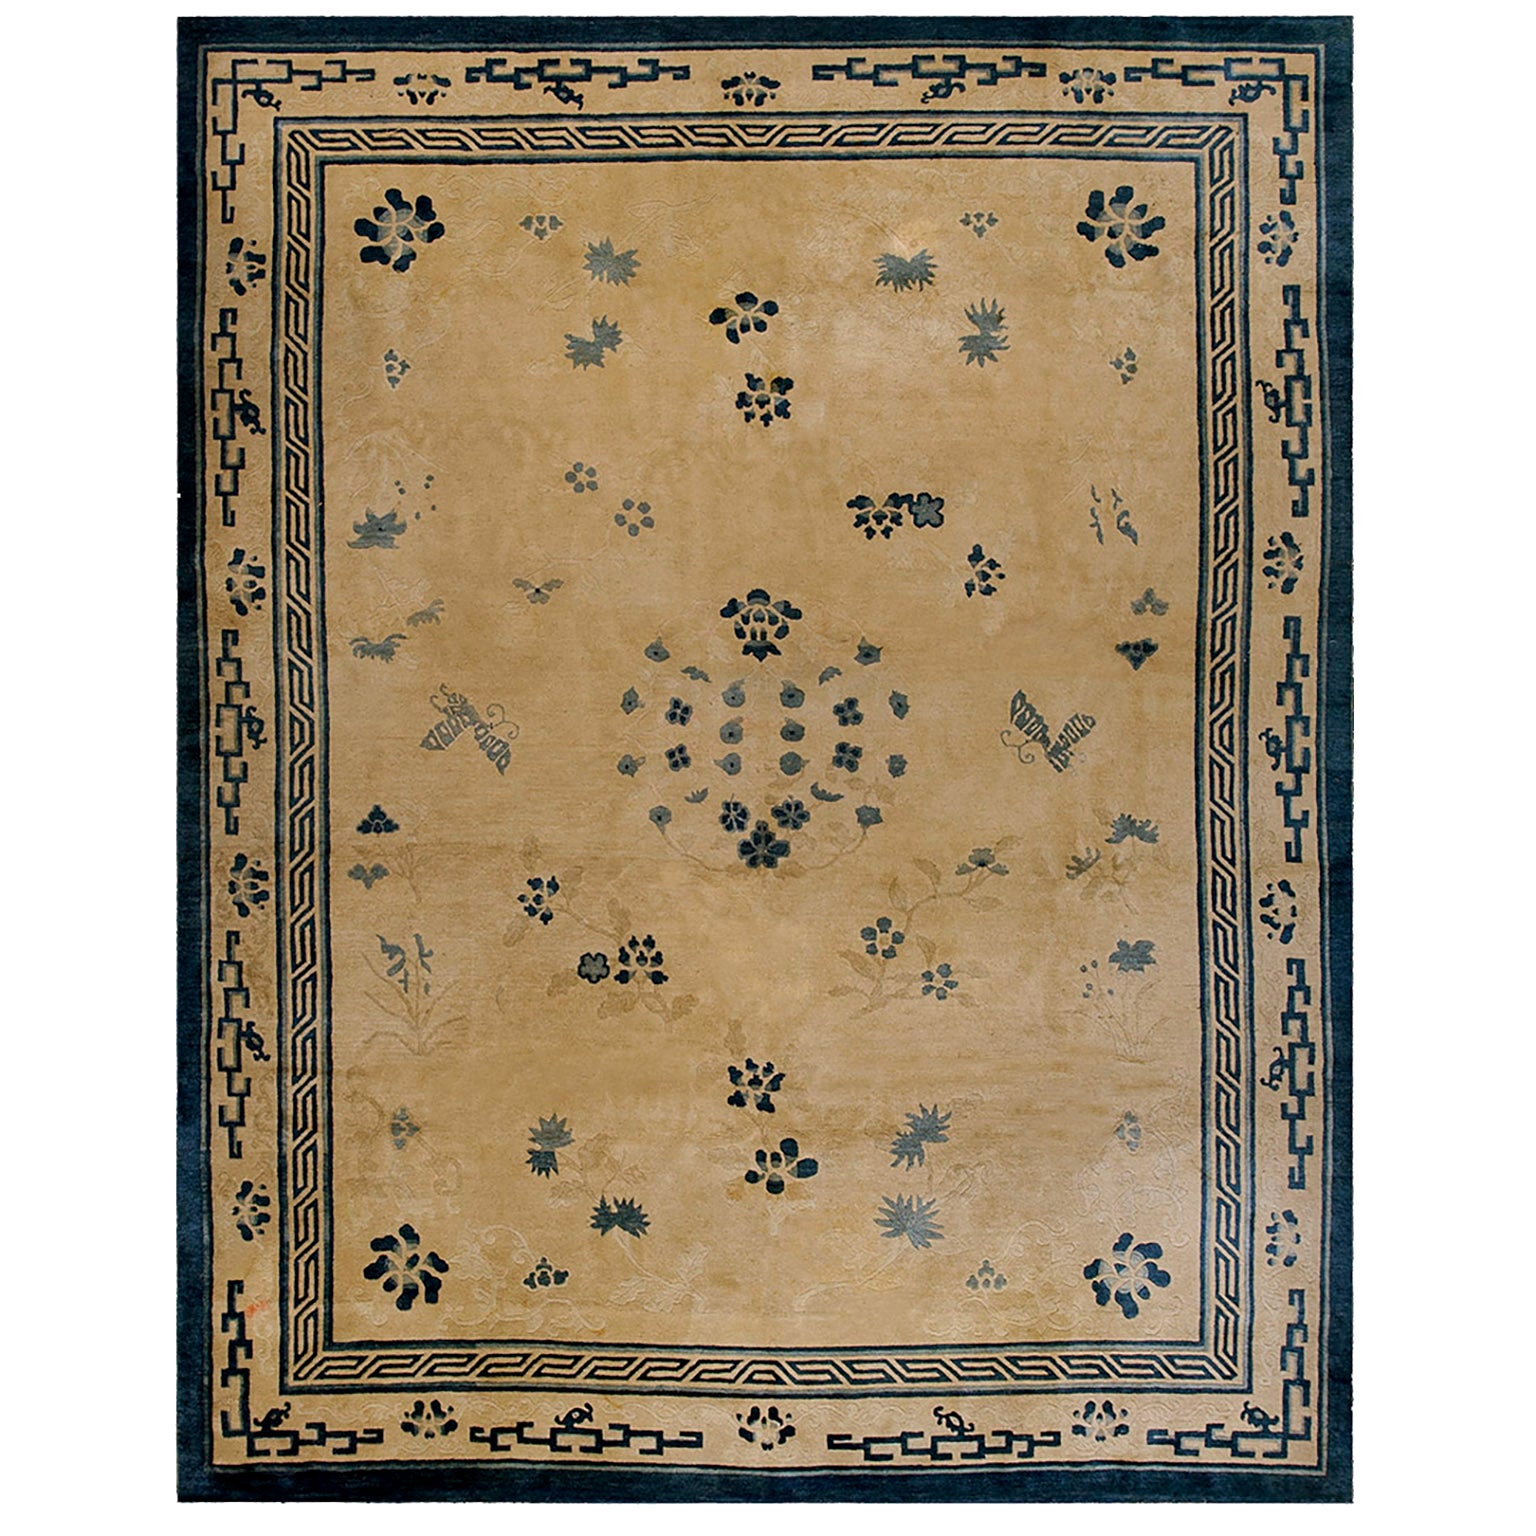 Late 19th Century Chinese Peking Carpet ( 8'4" x 10'2" - 255 x 310 ) For Sale